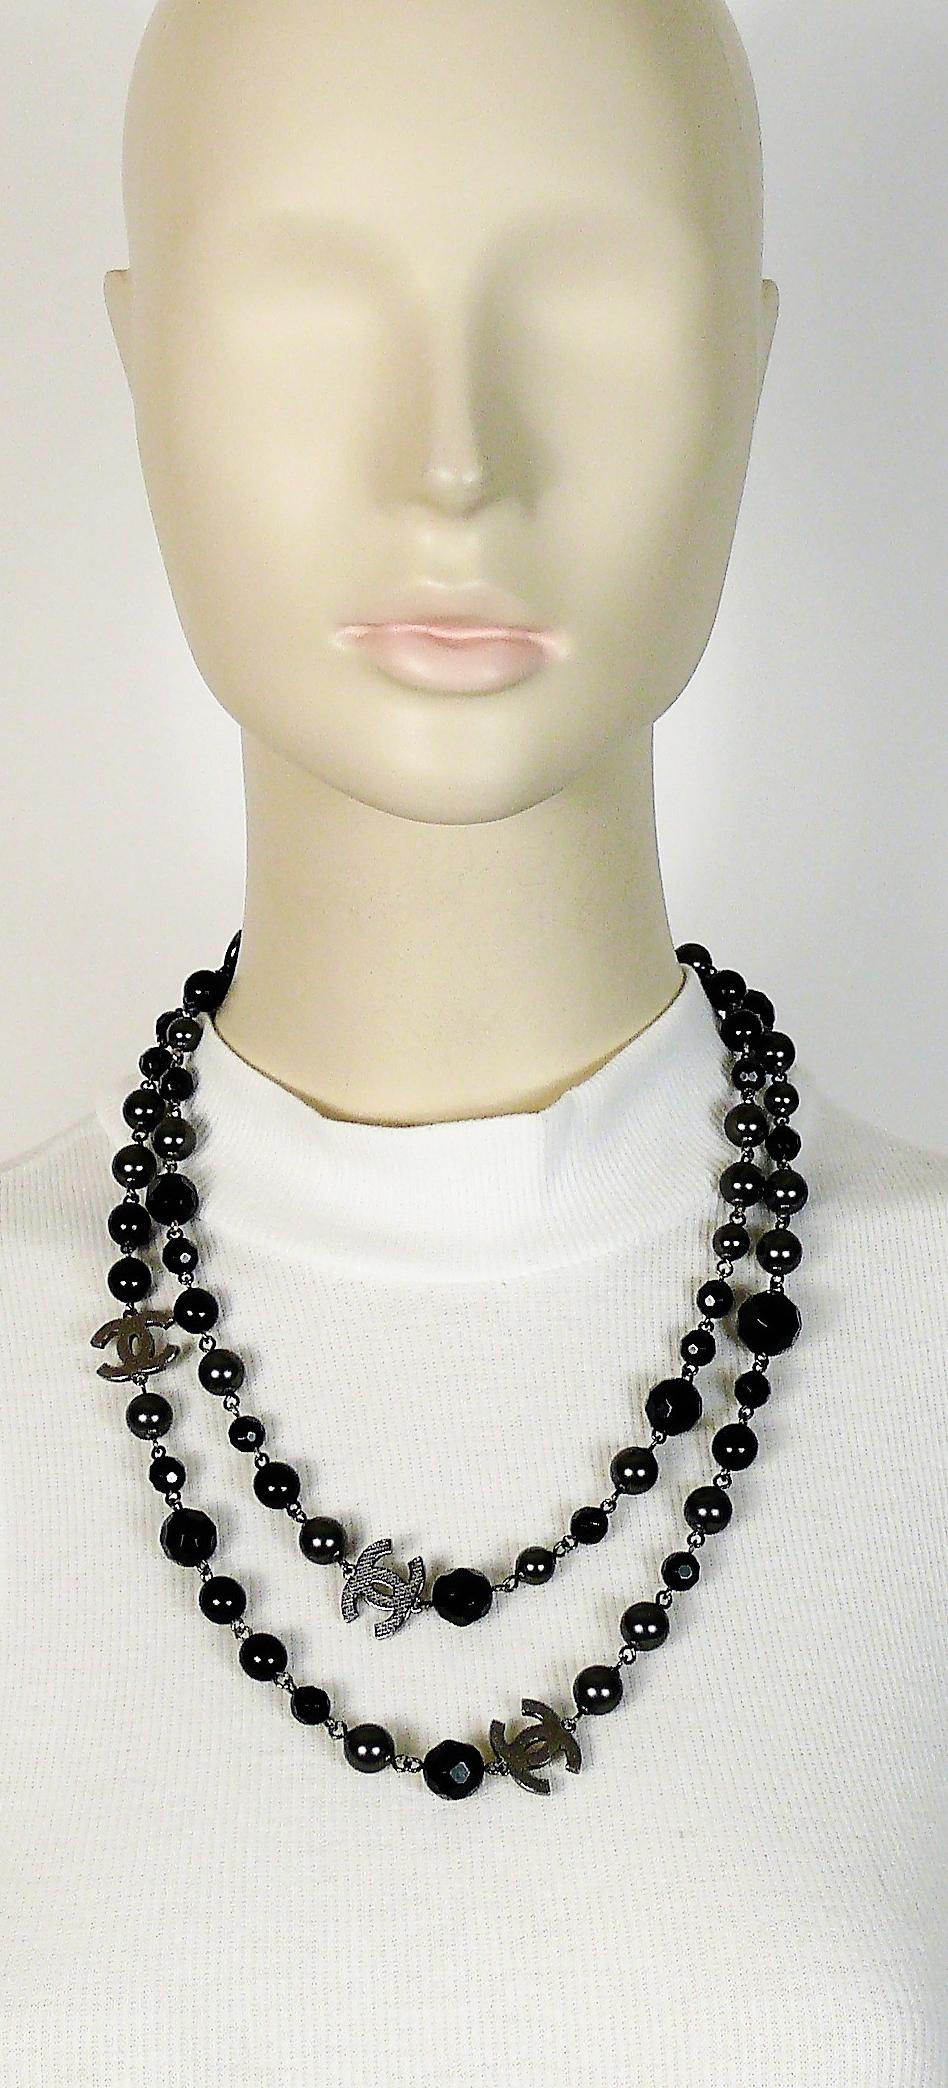 grey beads necklace